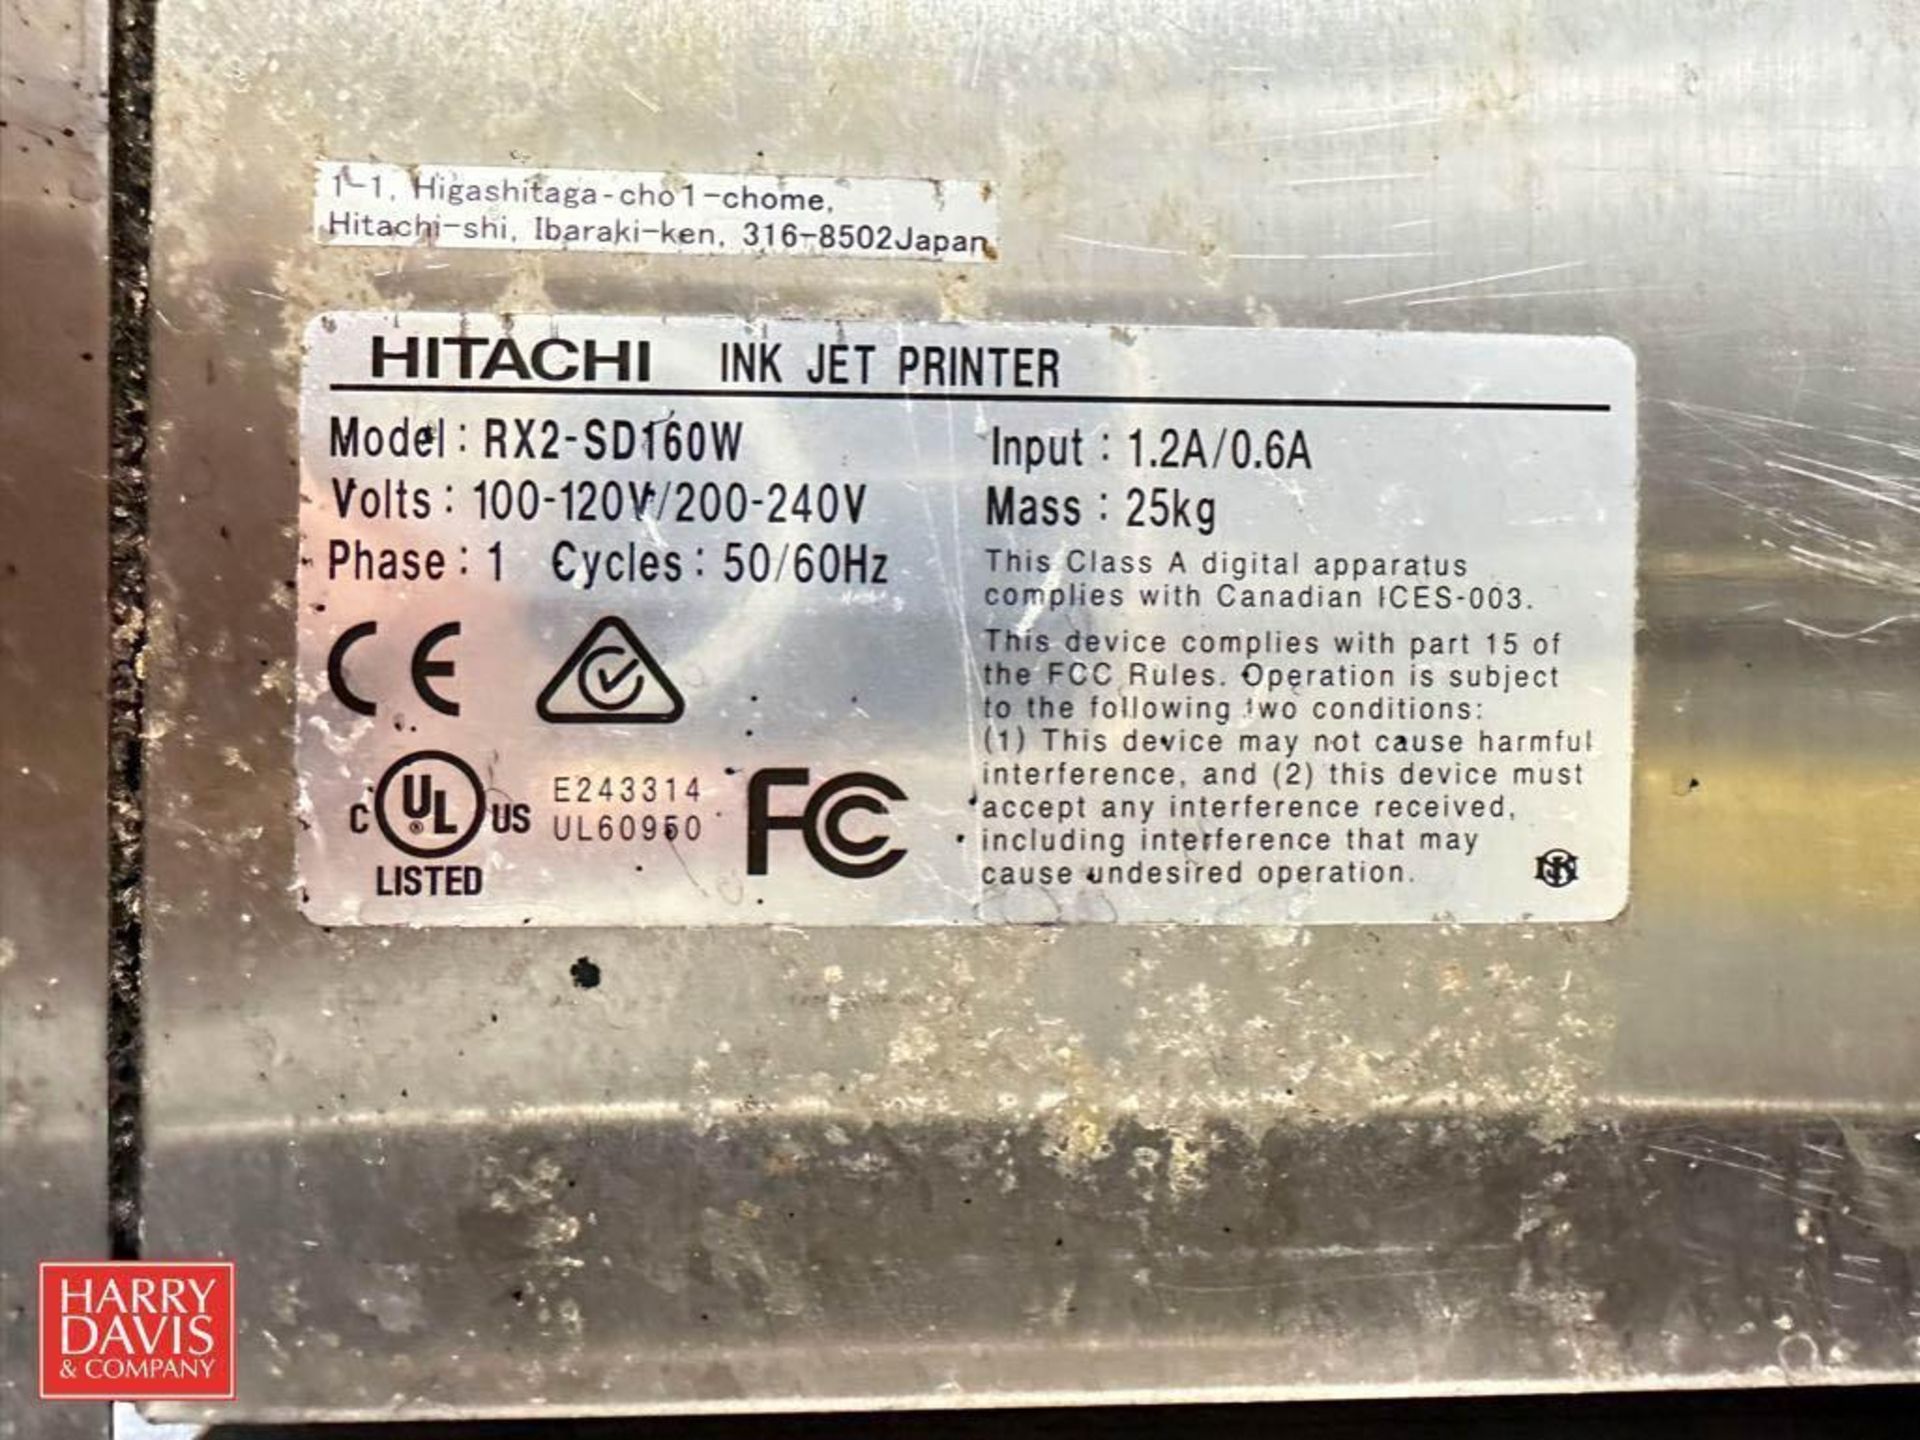 Hitachi Ink Jet Printer, Model: RX2-SD160W with S/S Cart - Rigging Fee: $125 - Image 2 of 2